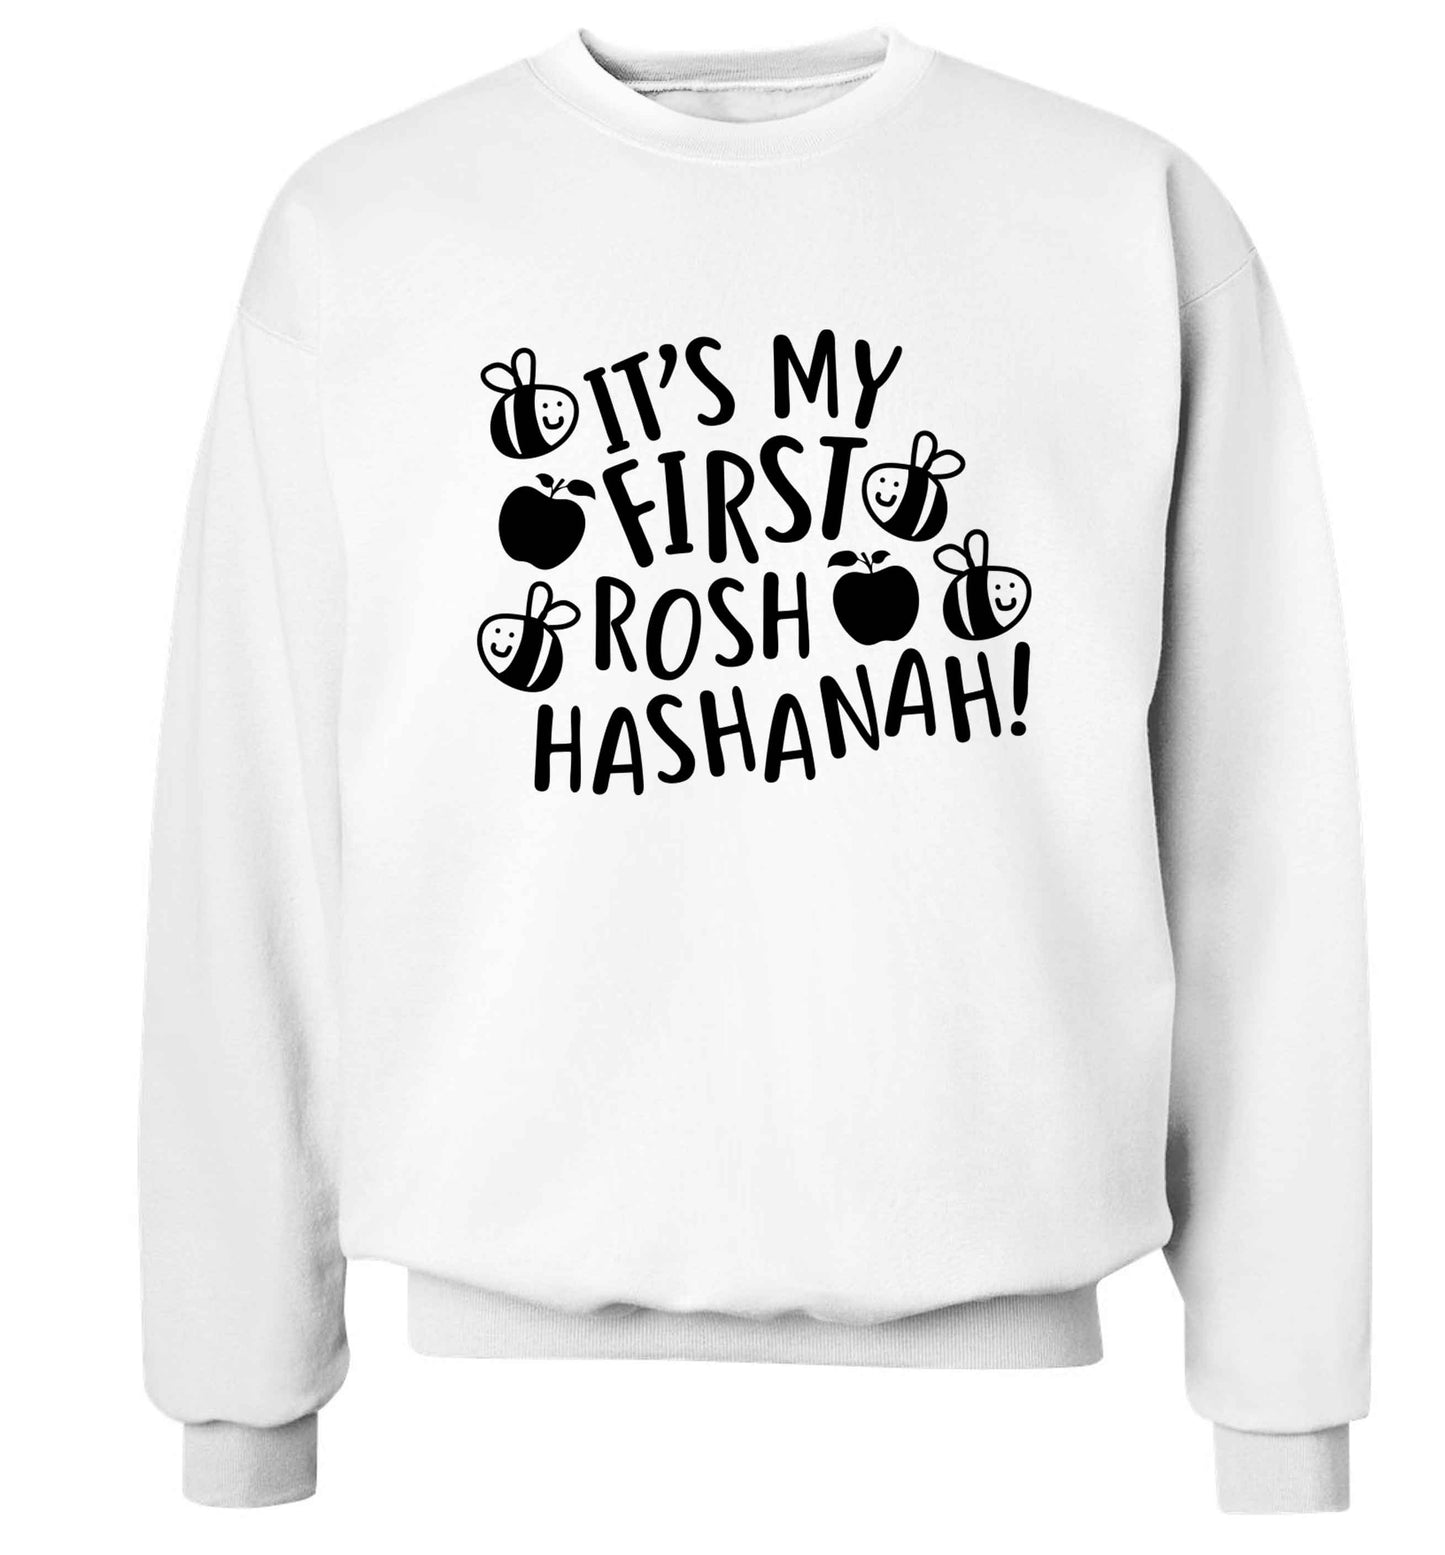 Its my first rosh hashanah Adult's unisex white Sweater 2XL